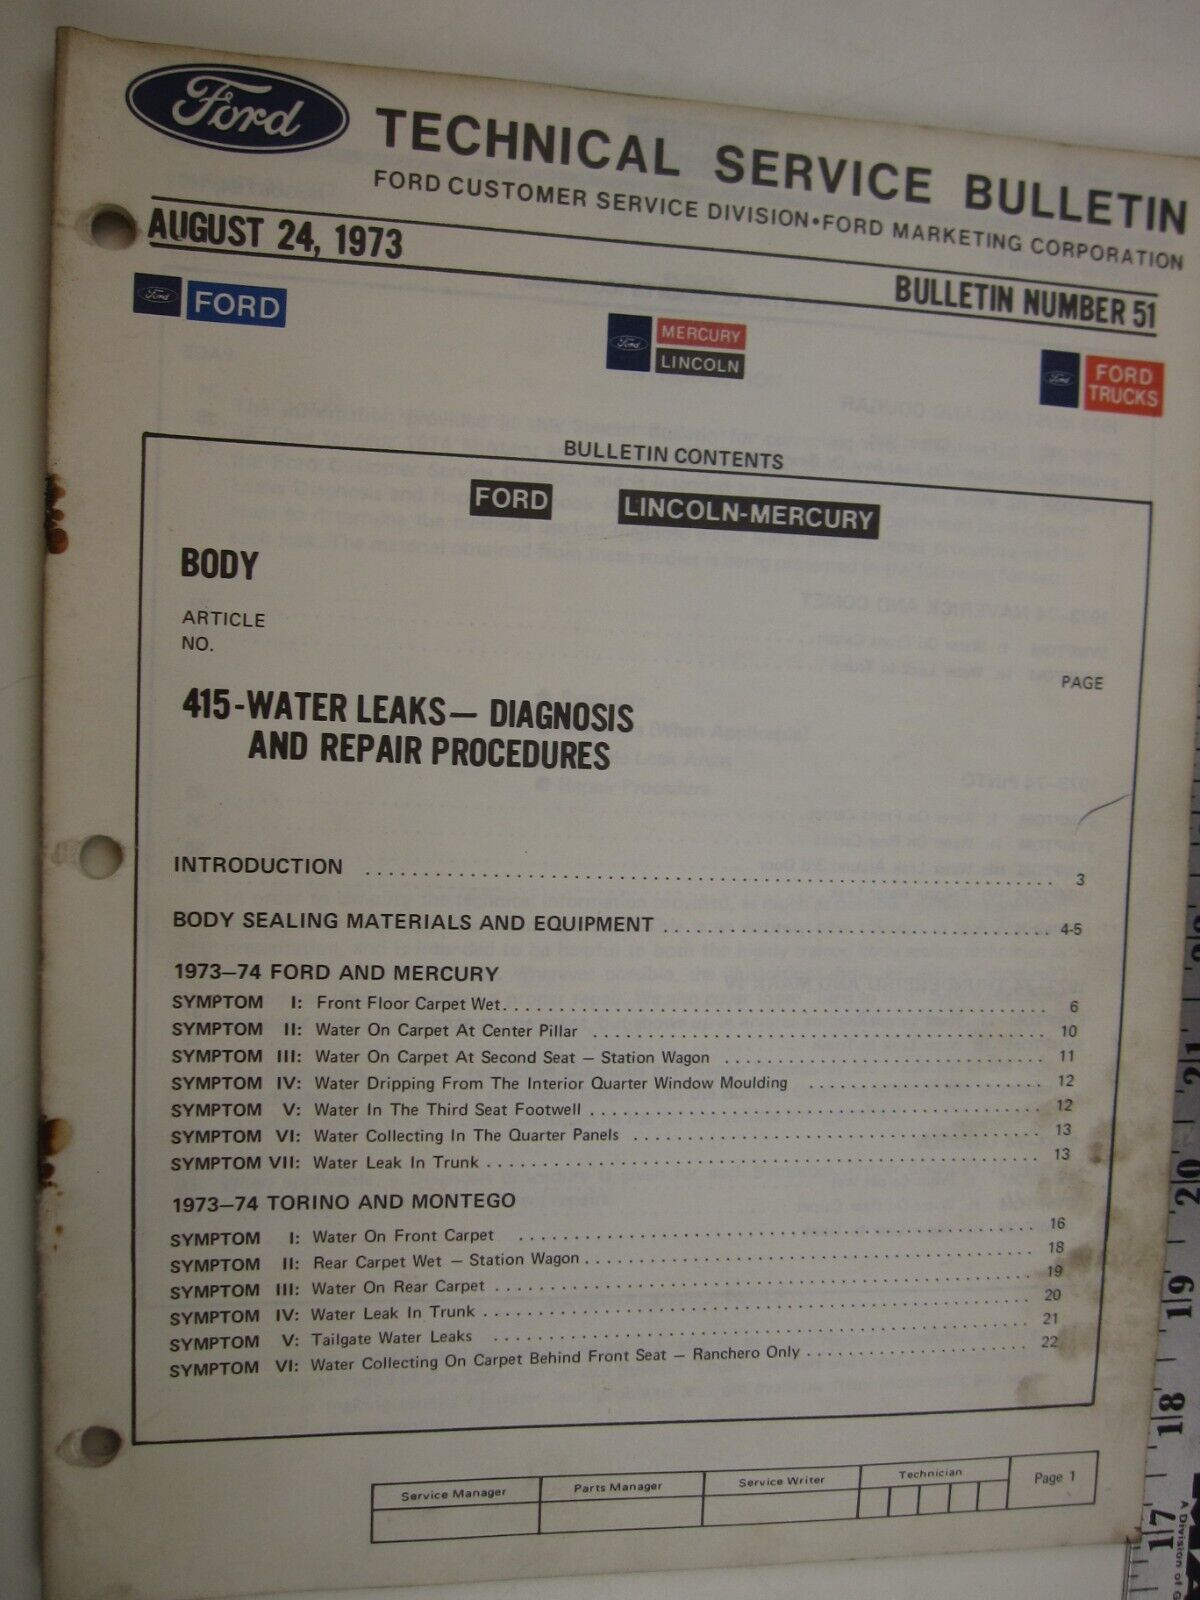 August 24, 1973 FORD Technical Service Bulletin Number 51   BIS